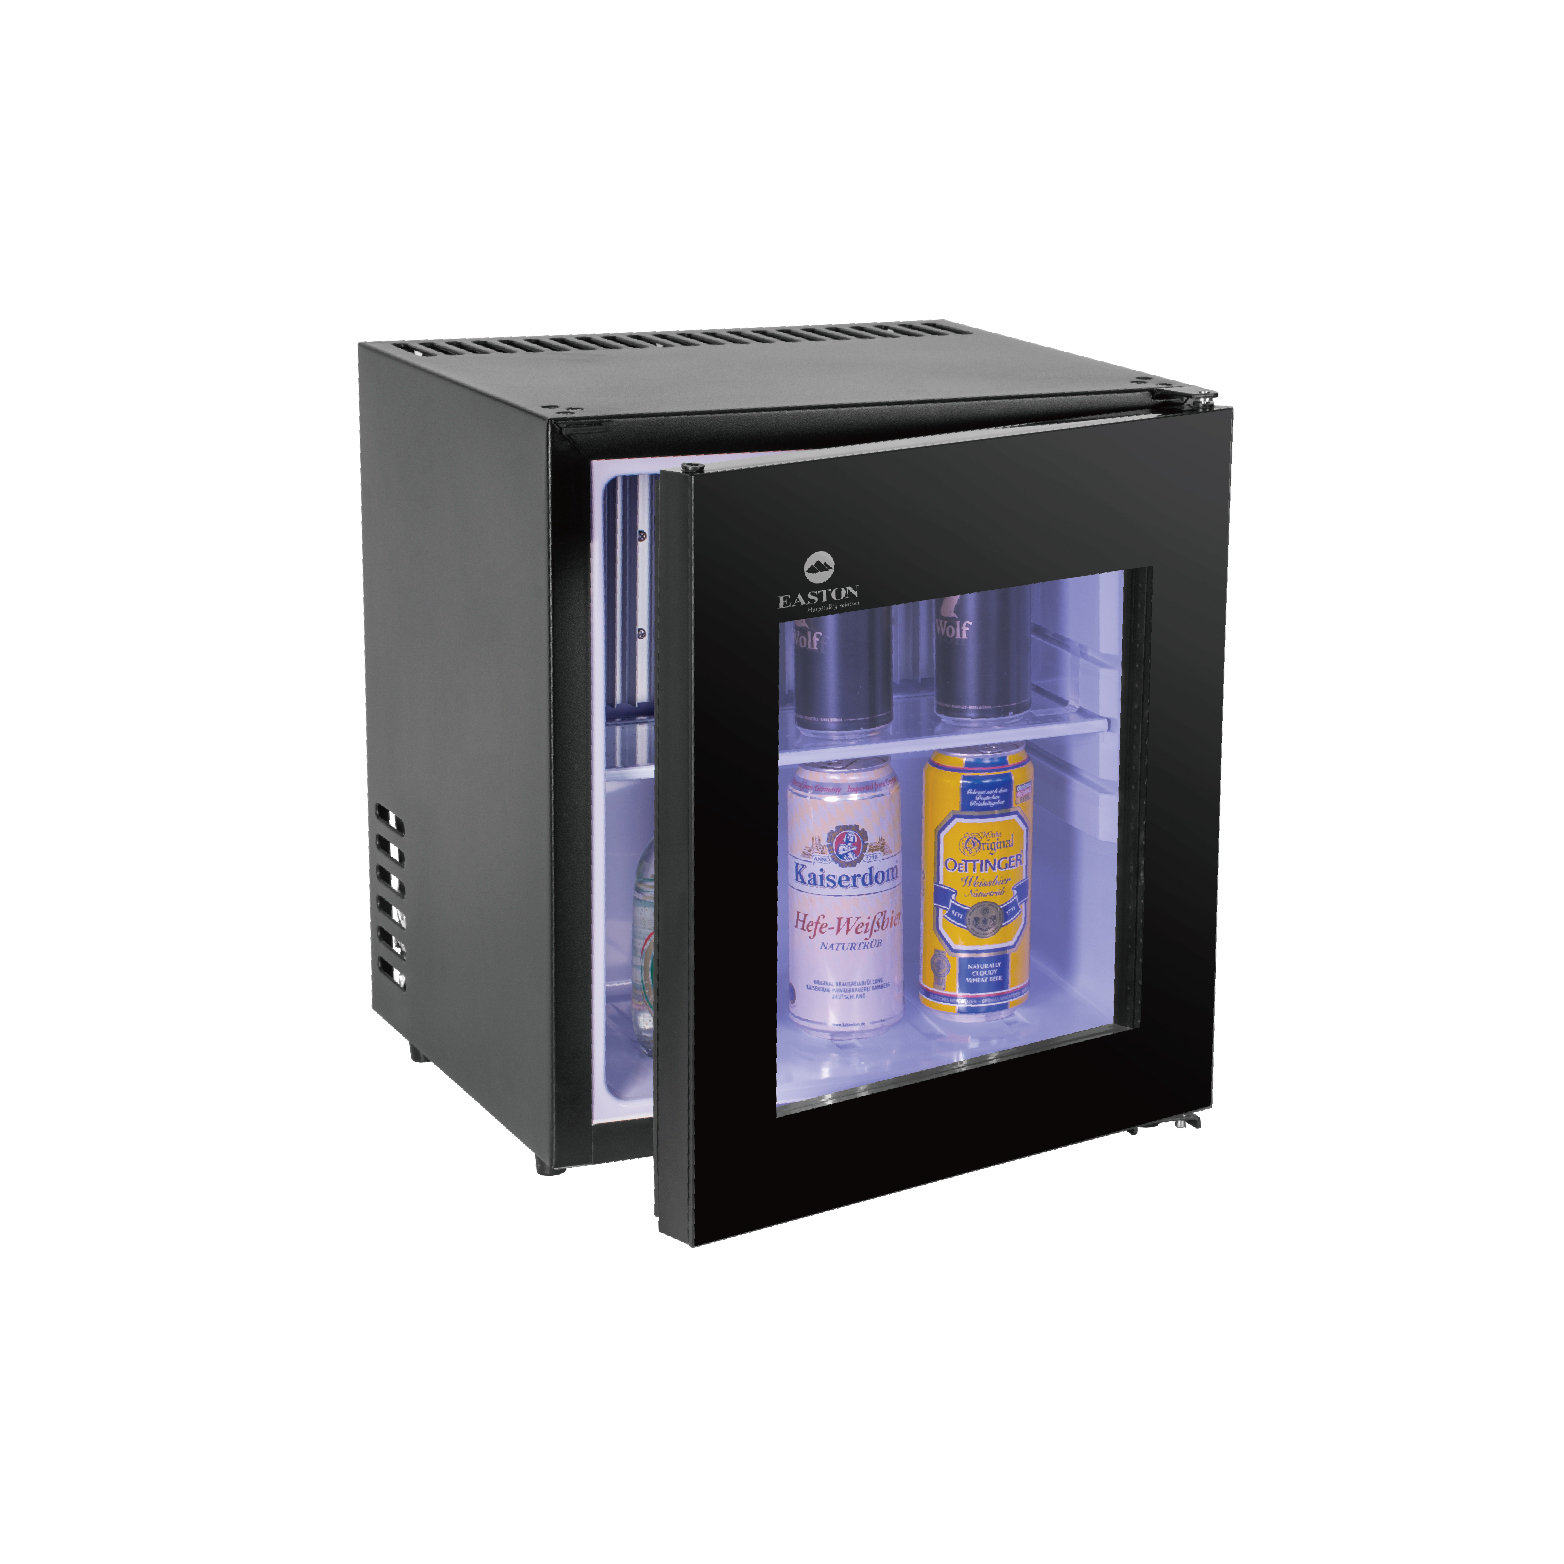 25L Absorption Capacity With Glass Door Hotel Completely Silent Minibar 